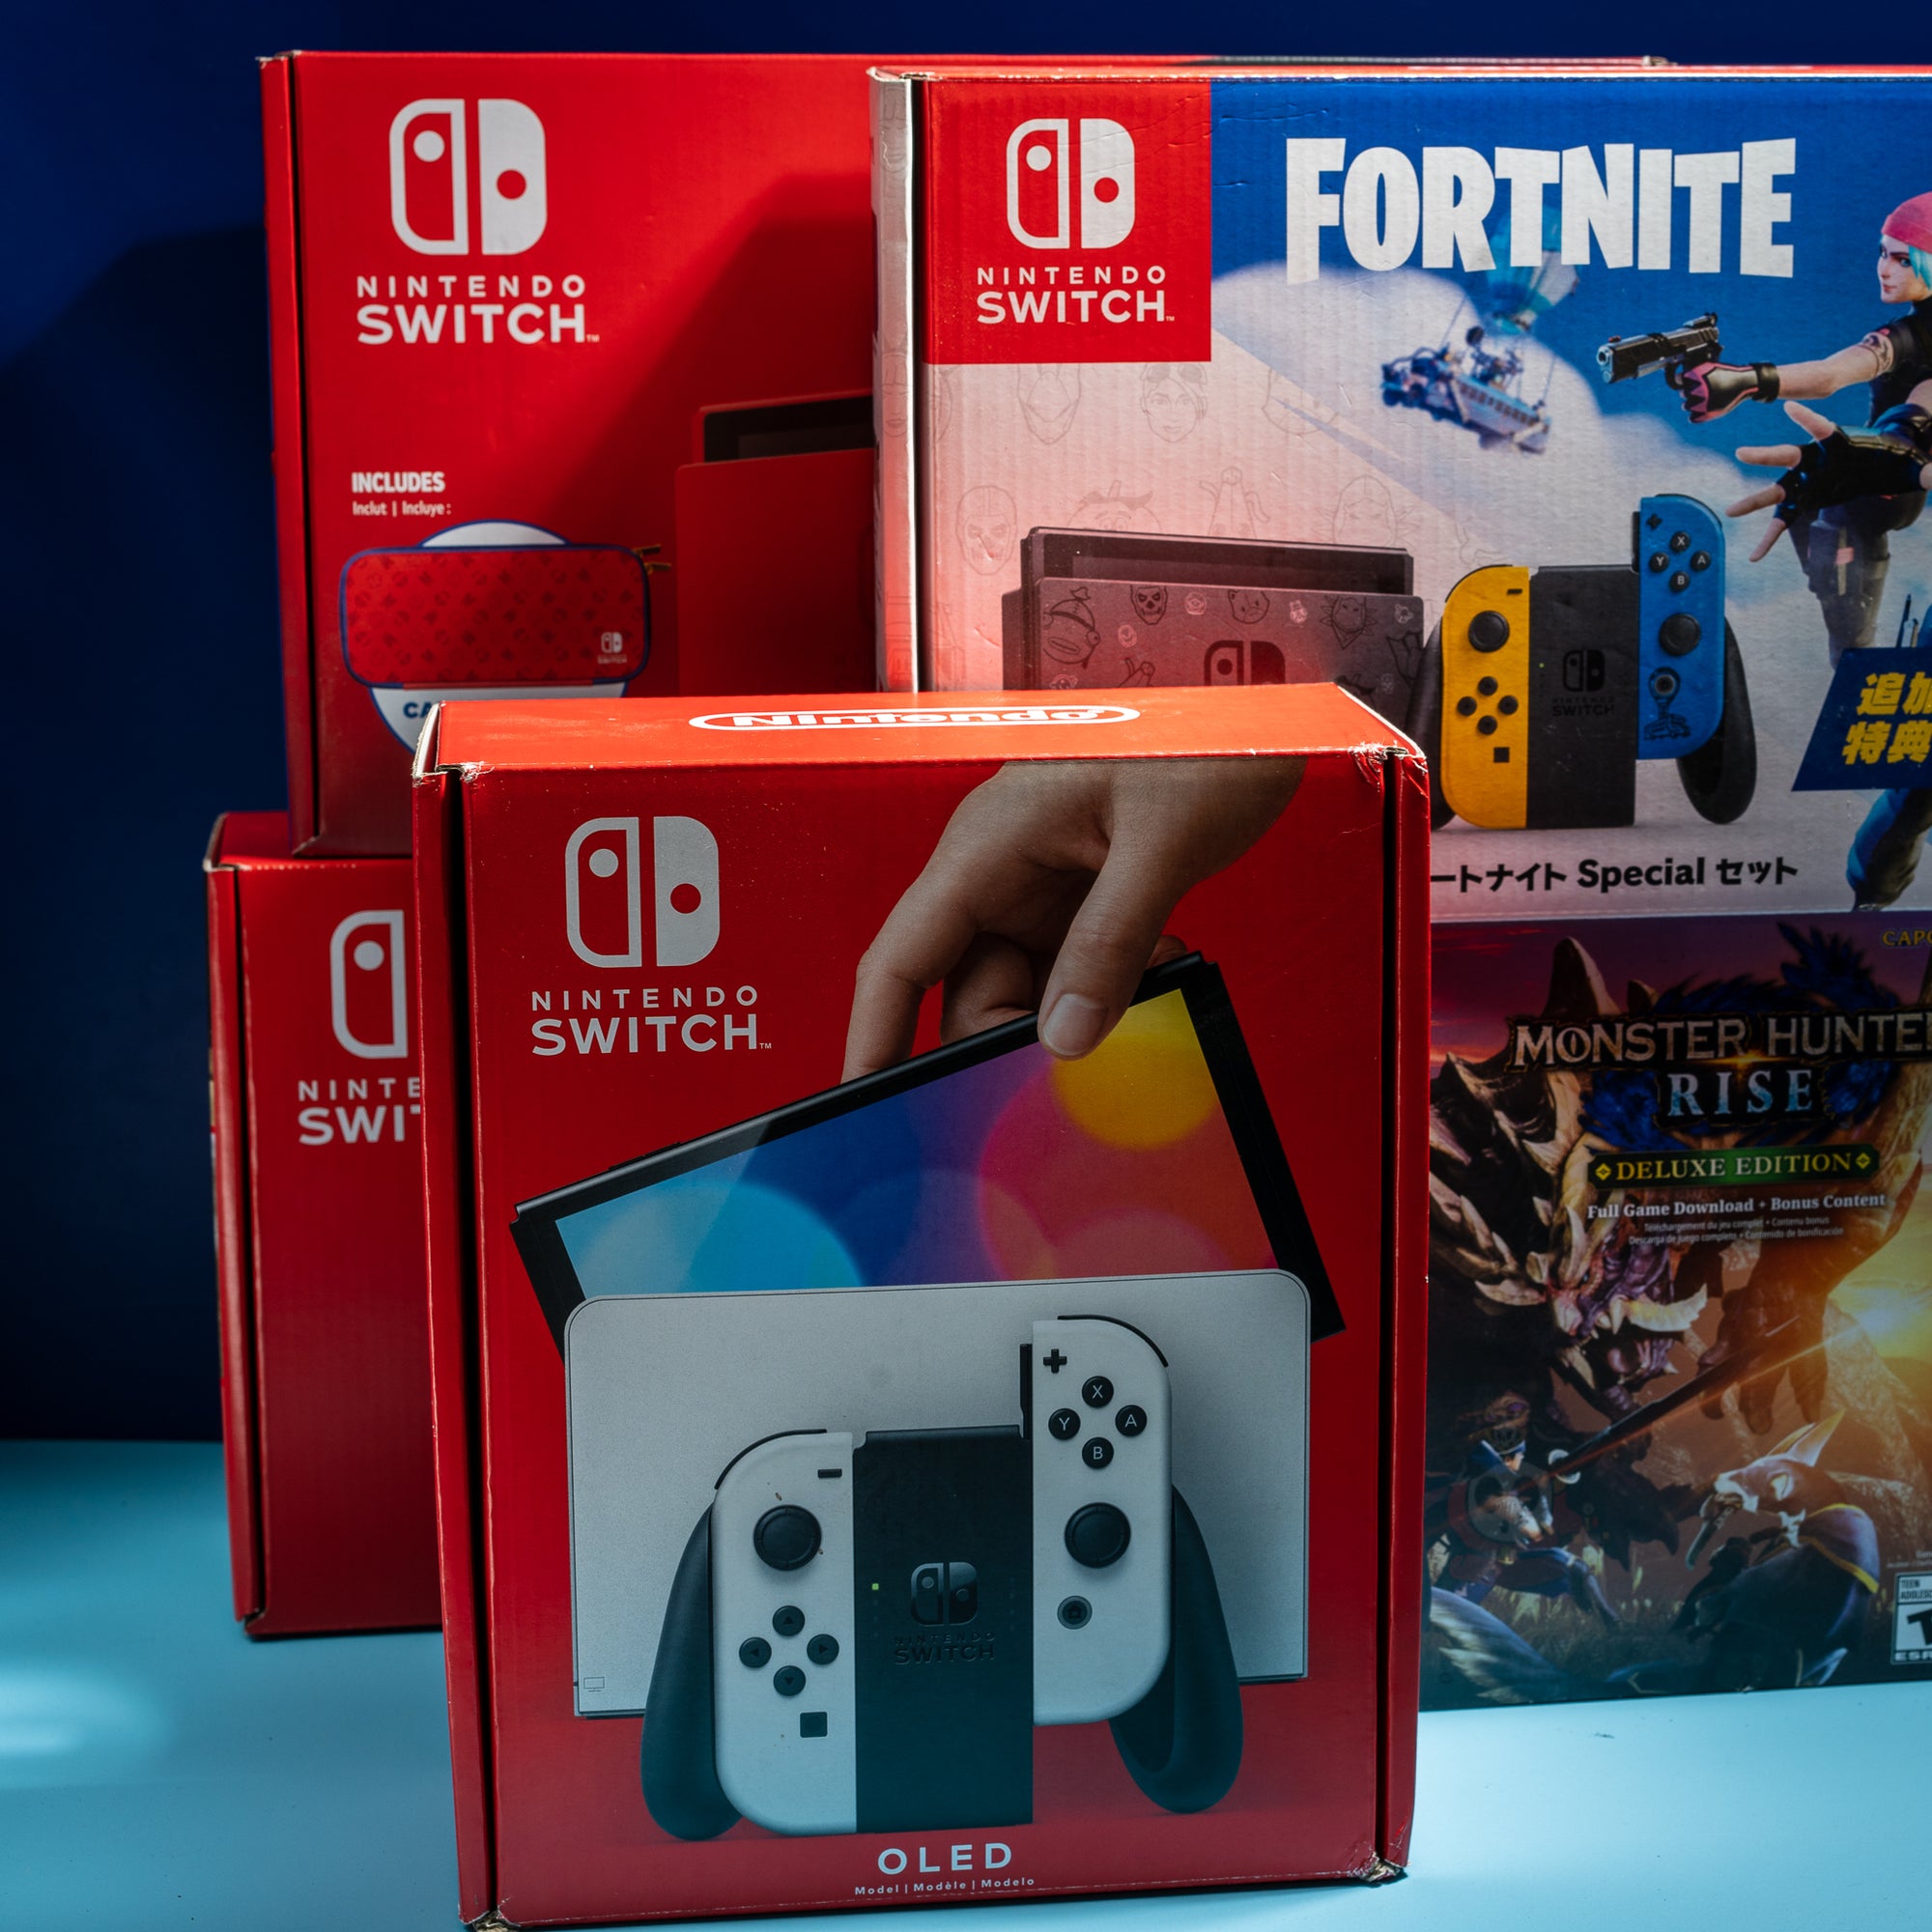 Patched Nintendo Switch Version Two Packages